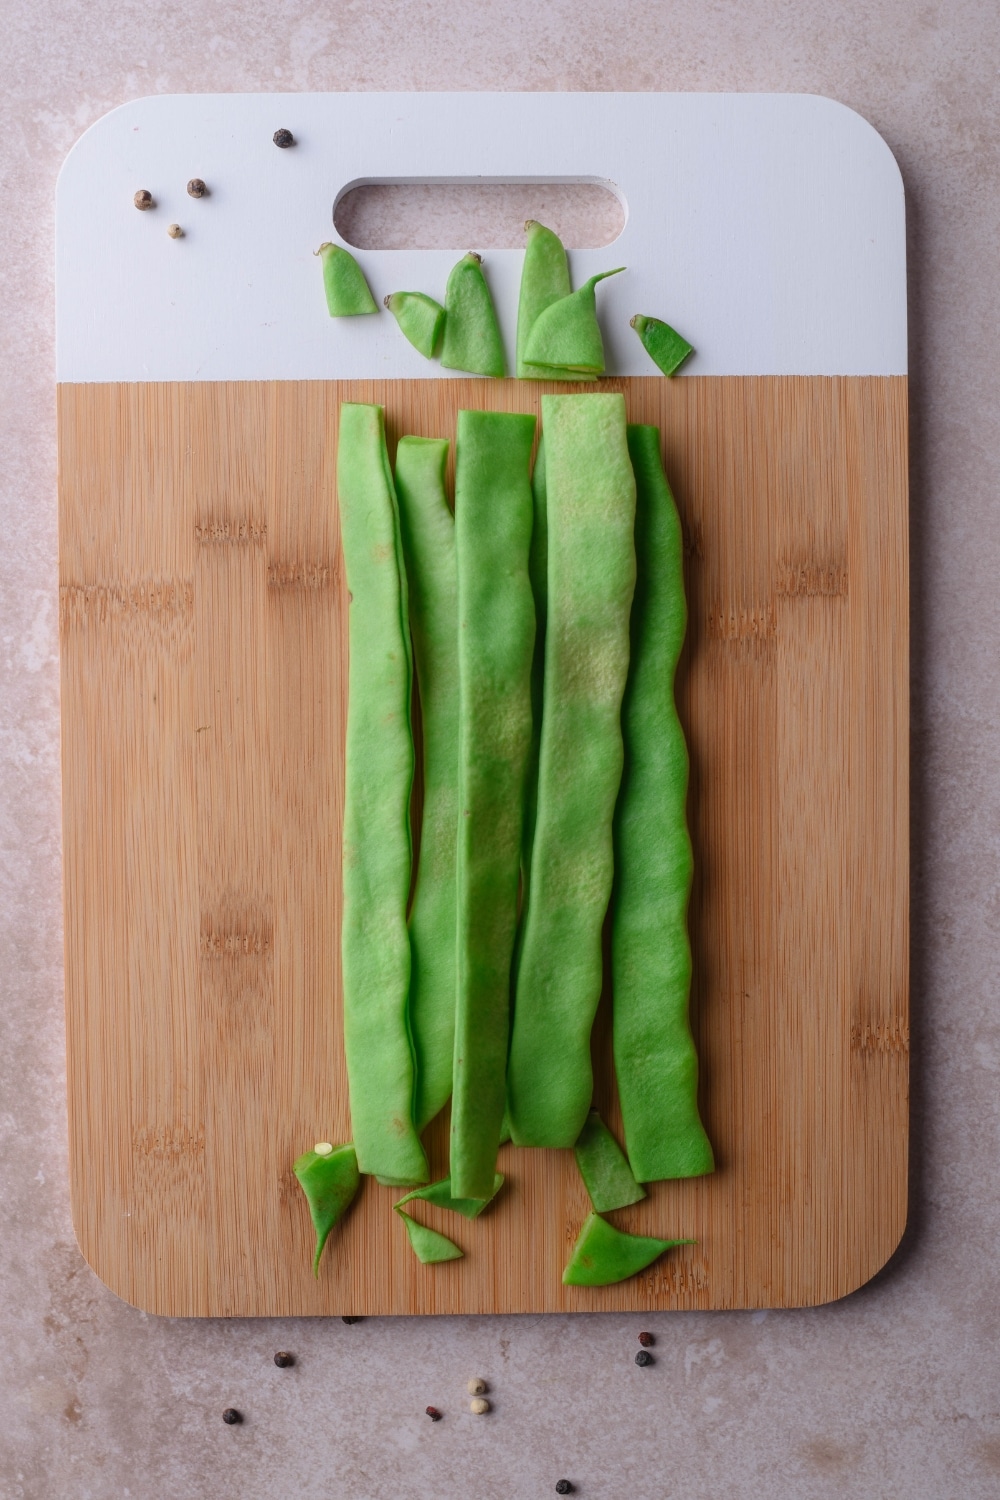 Trimmed green beans and their trimmed off ends on a wooden cutting board.